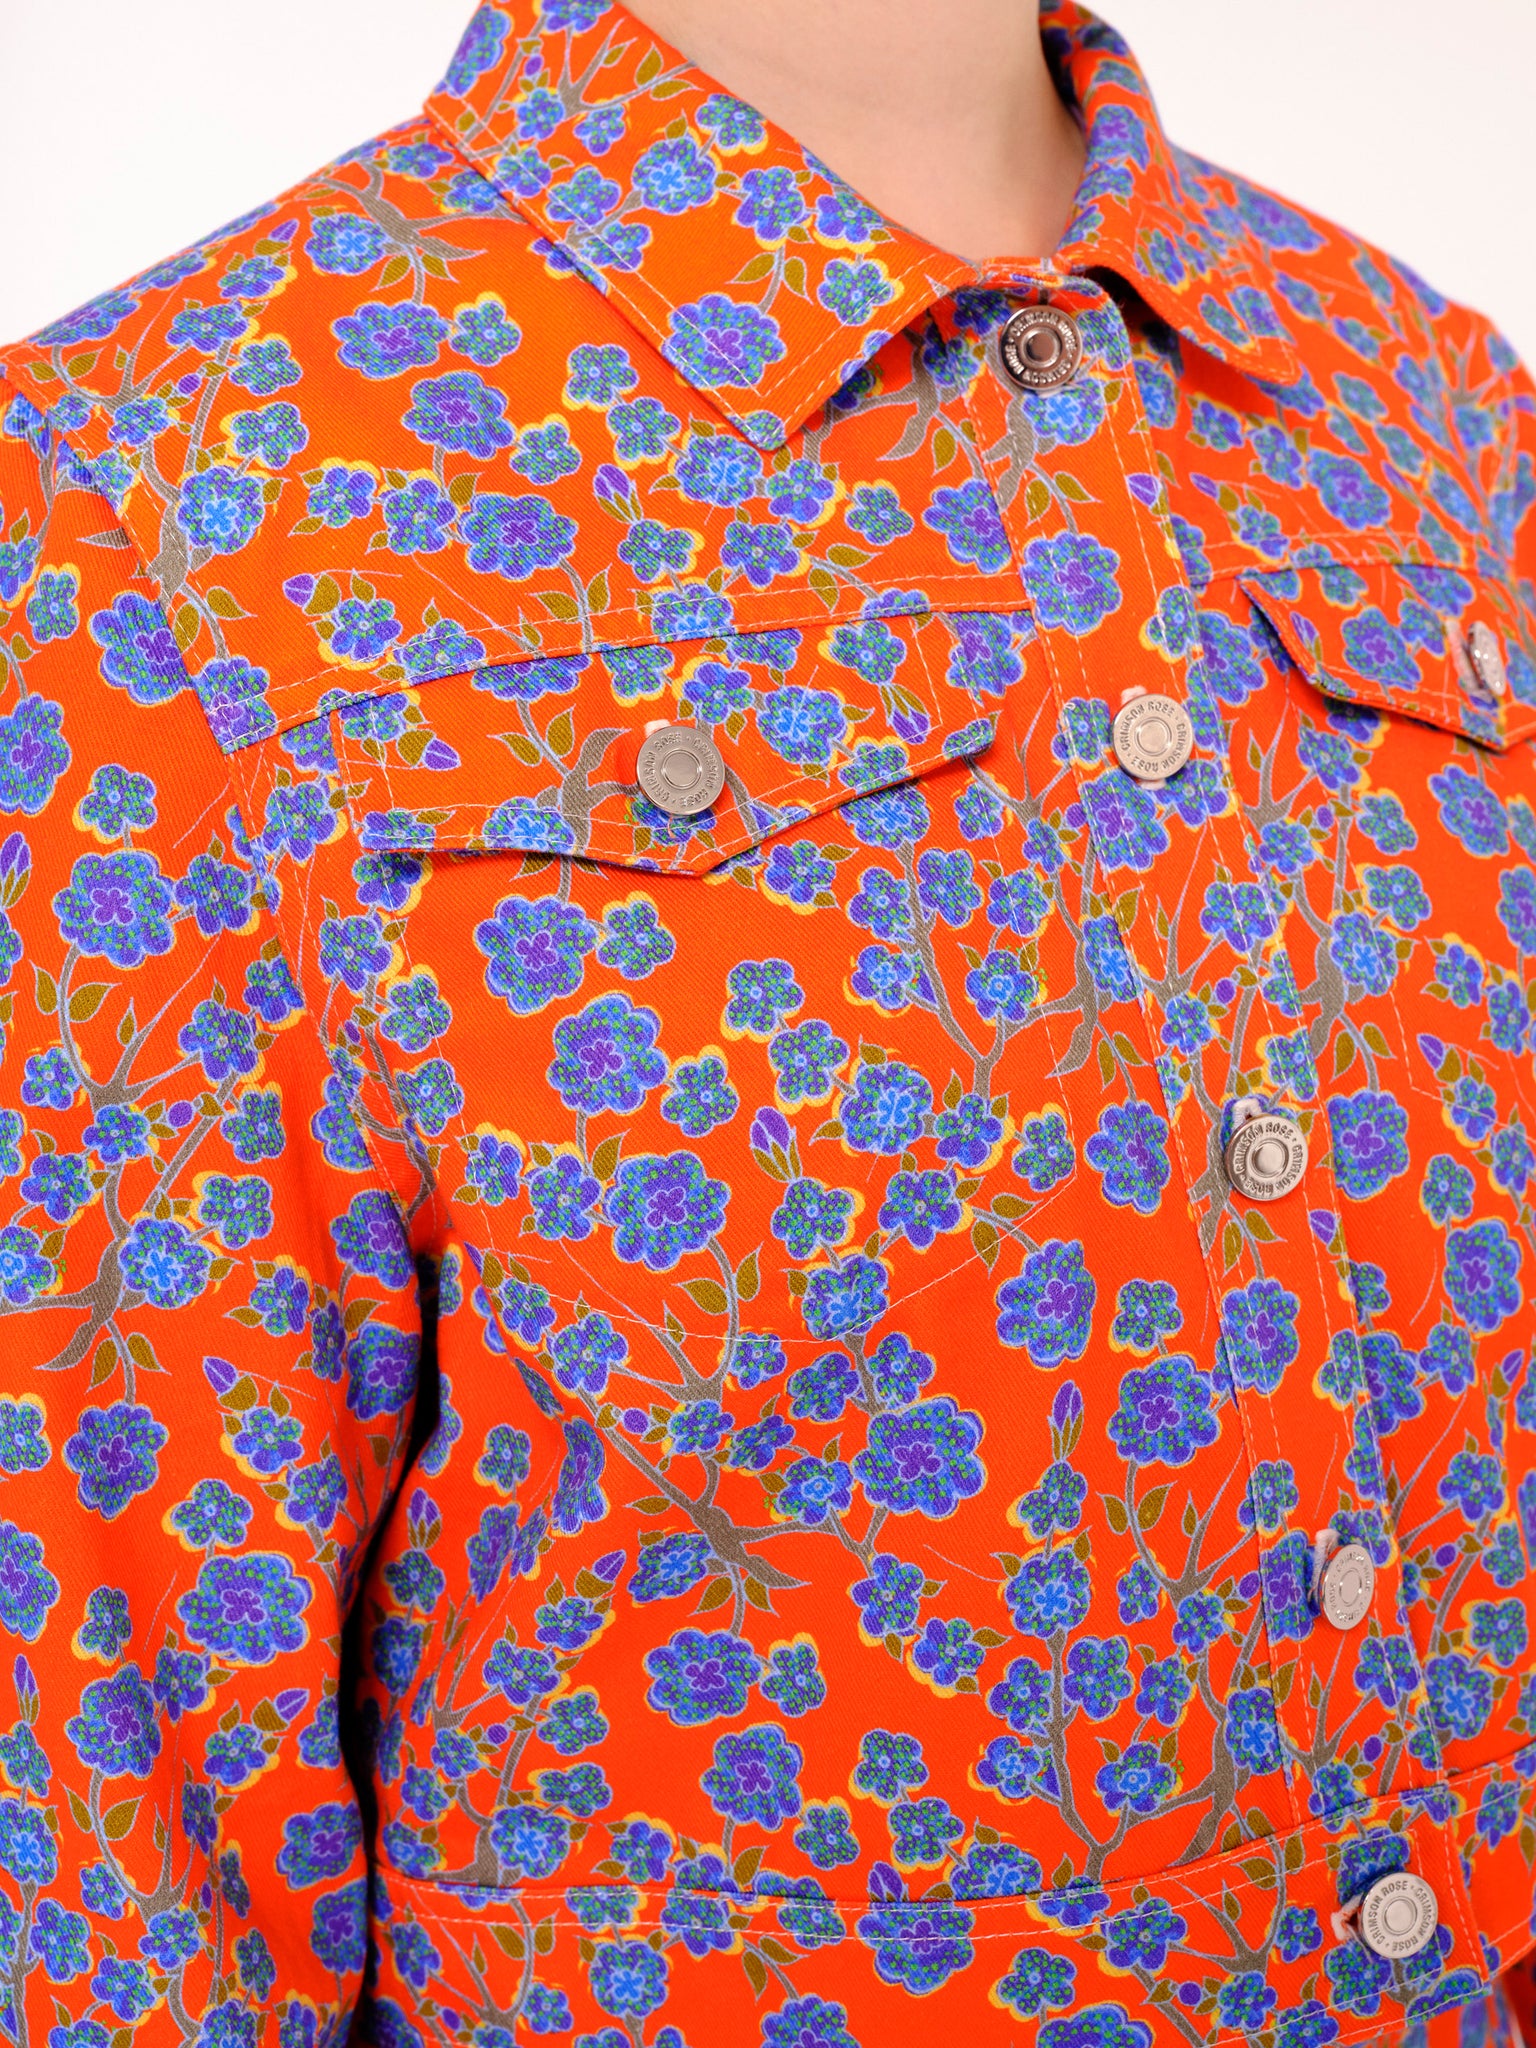 Close up details of the Crimson Rose cropped cotton drill jacket with orange and blue floral print. Photography Rowan Corr.